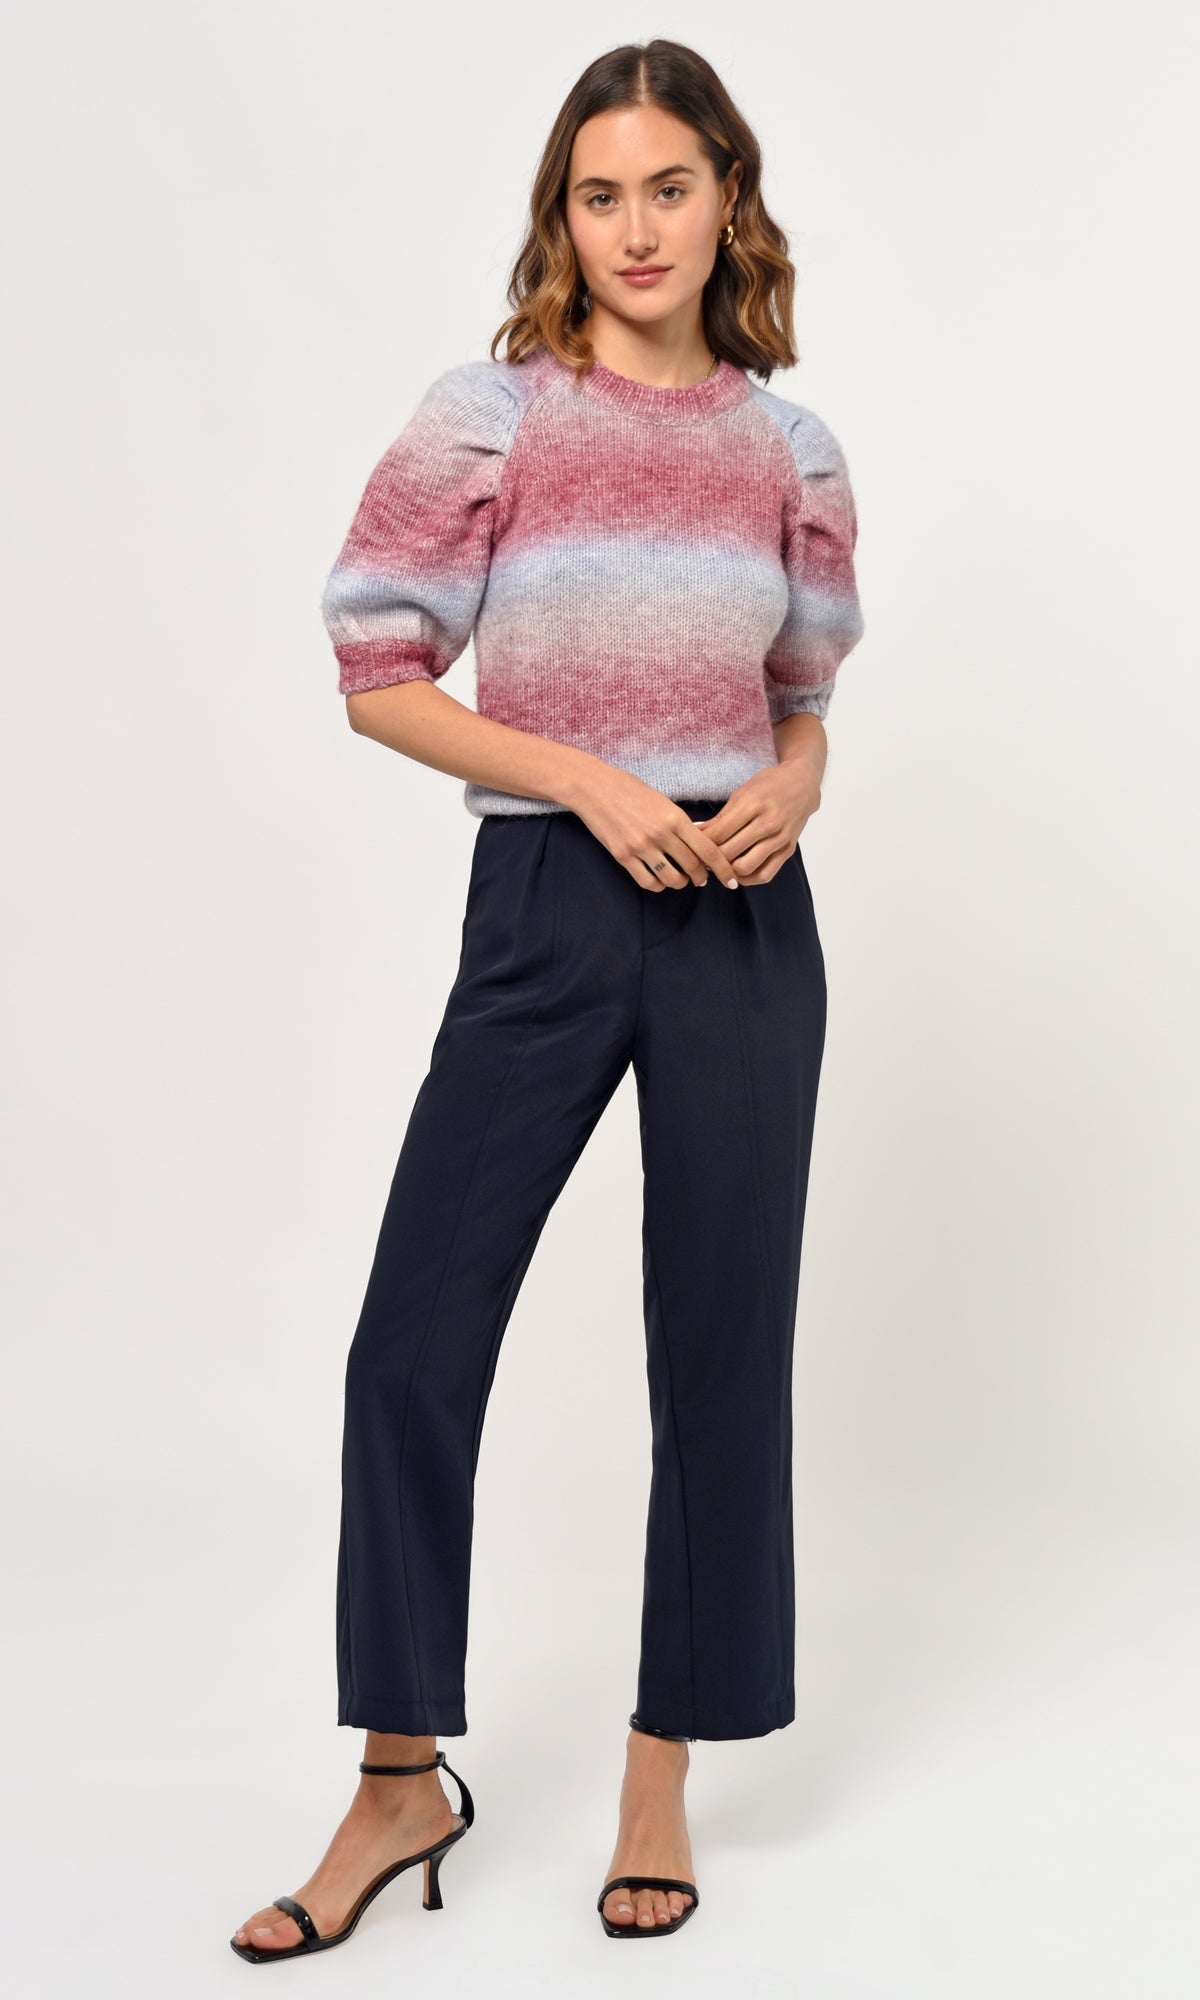 Christi Ombre Sweater Knit Top